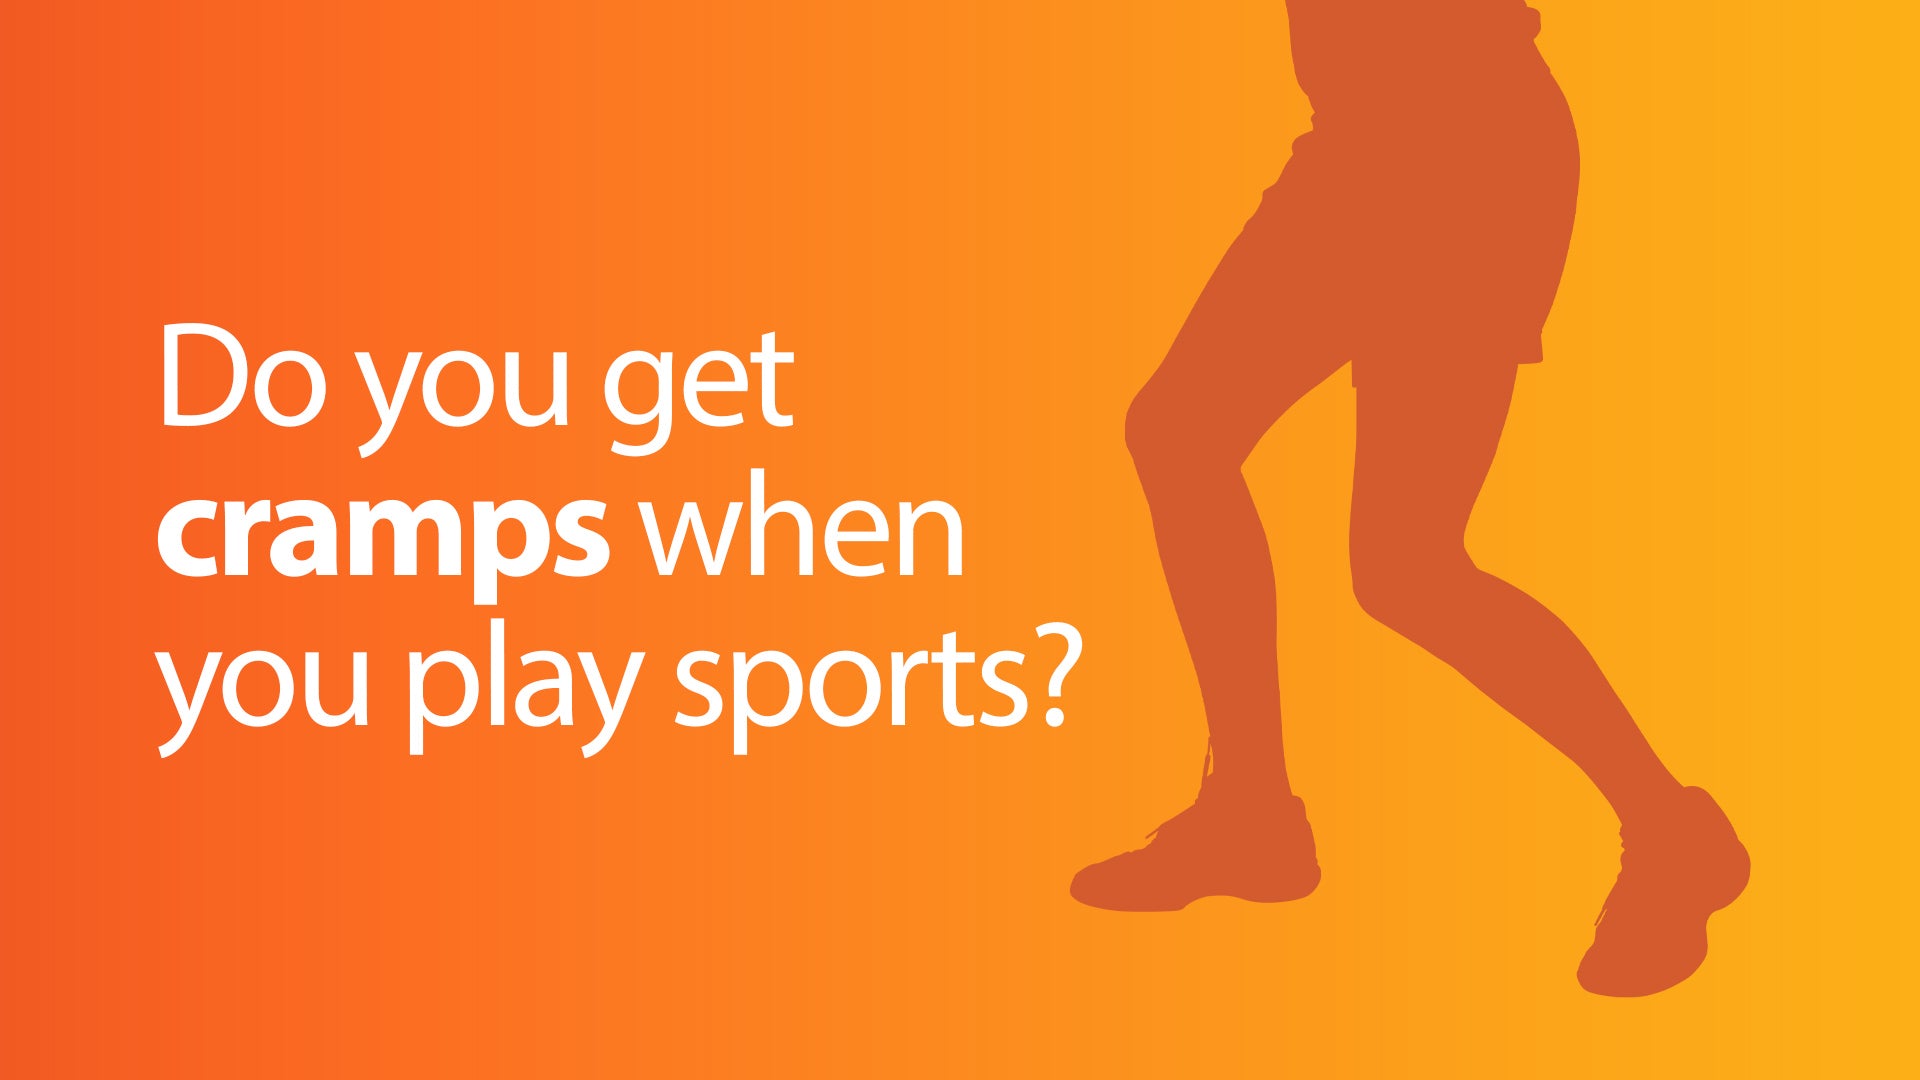 Do you get cramps when you play sports?